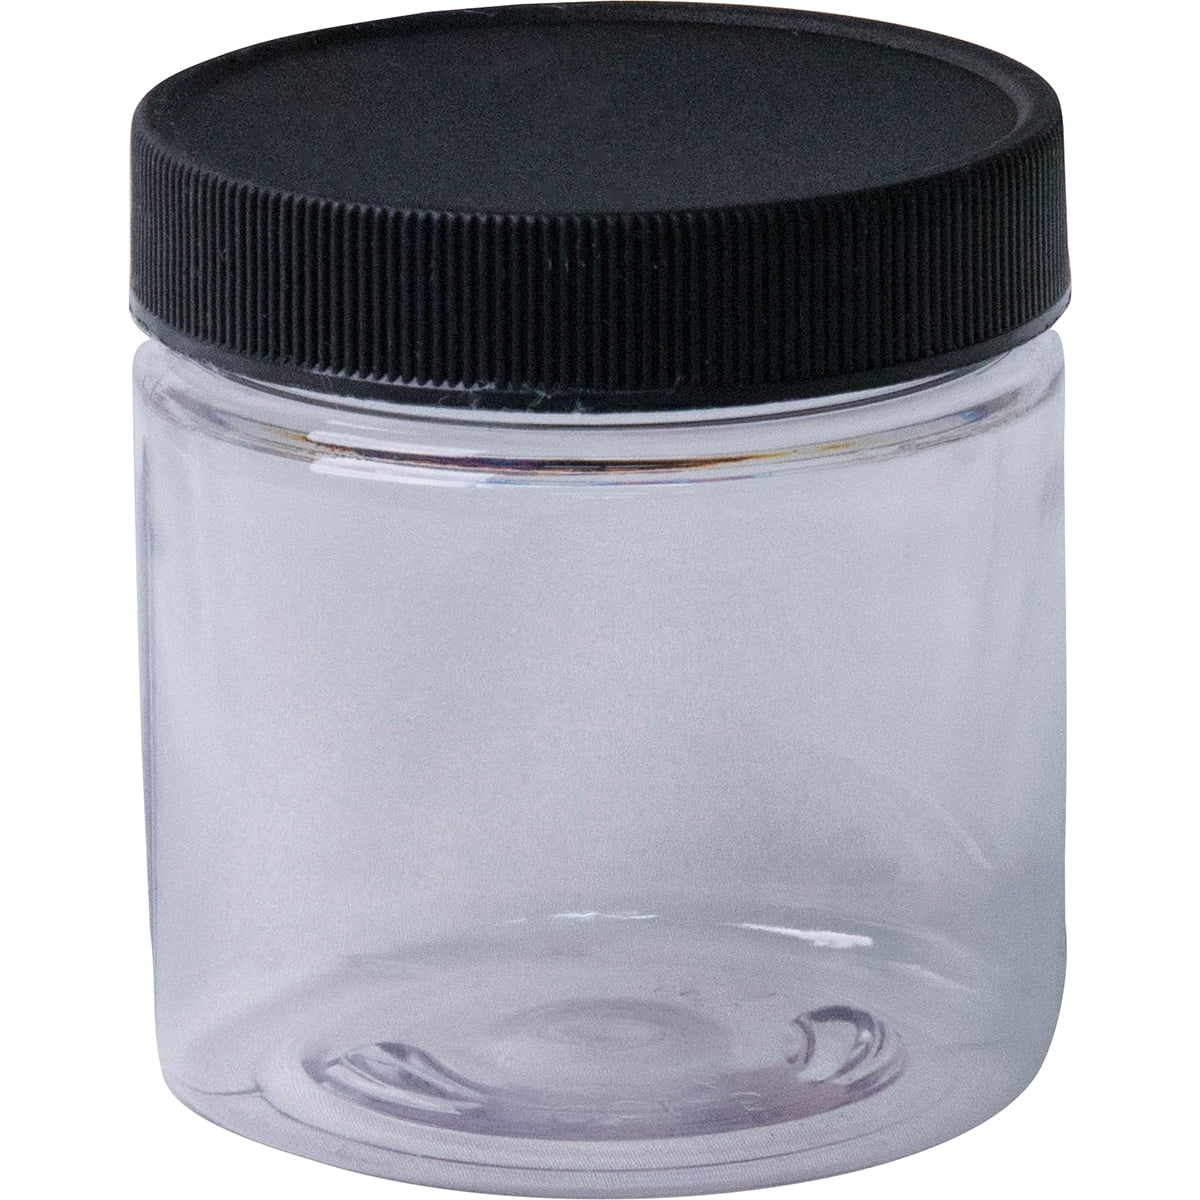 Mainstays 28 oz 2-Compartment Rectangular Black Container with Clear Lid